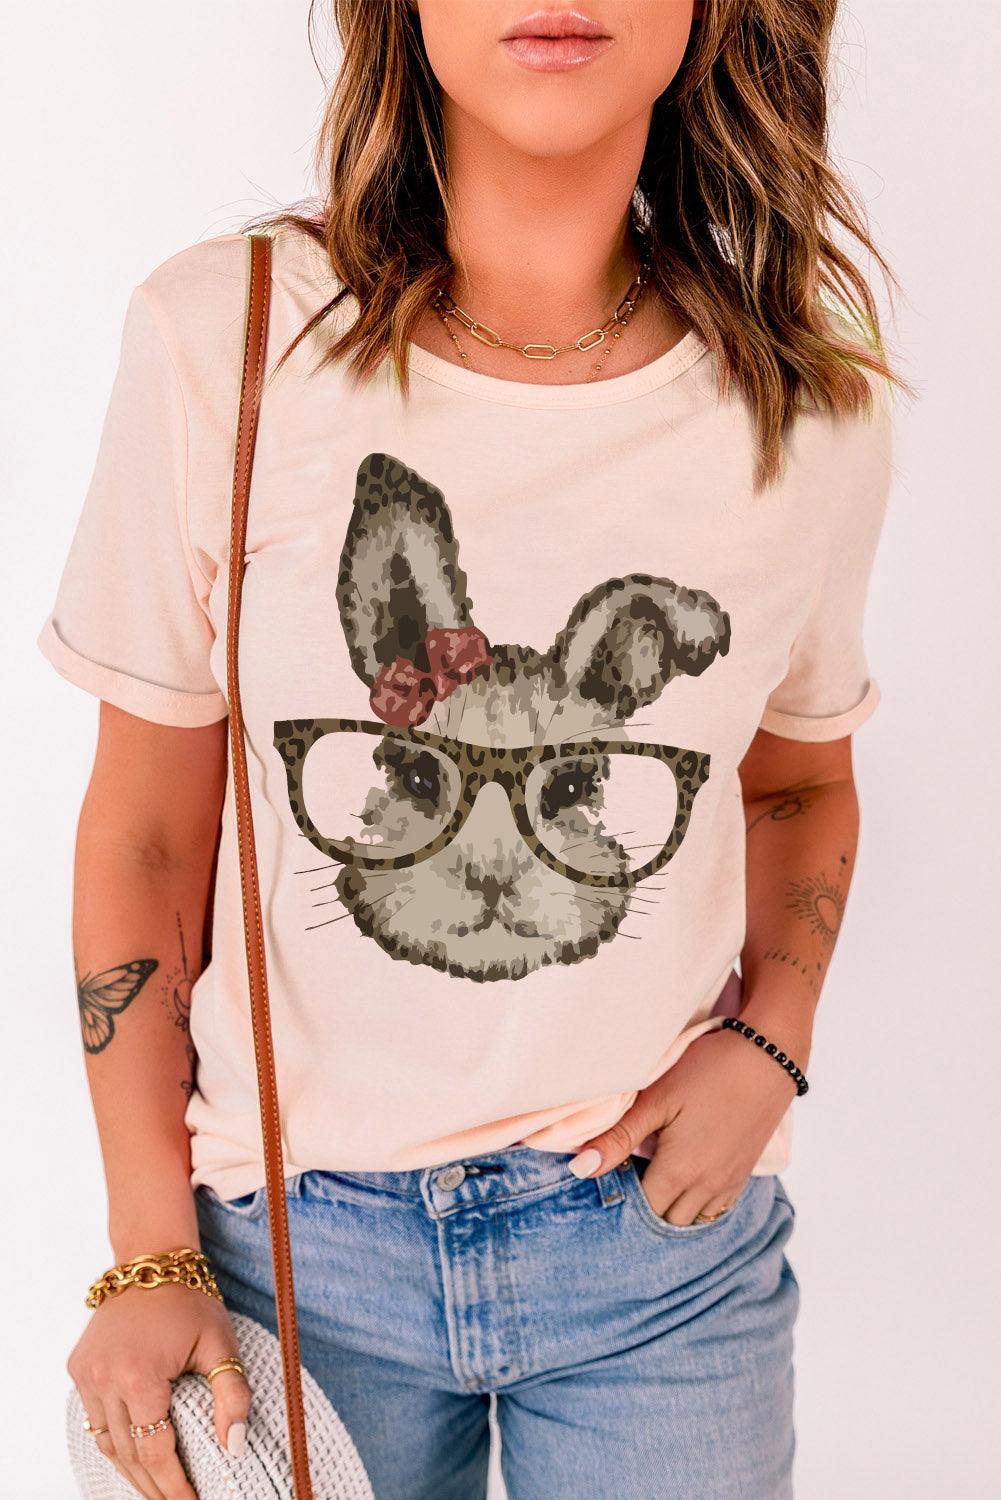 Easter Bunny Graphic Cuffed T-Shirt - Flyclothing LLC